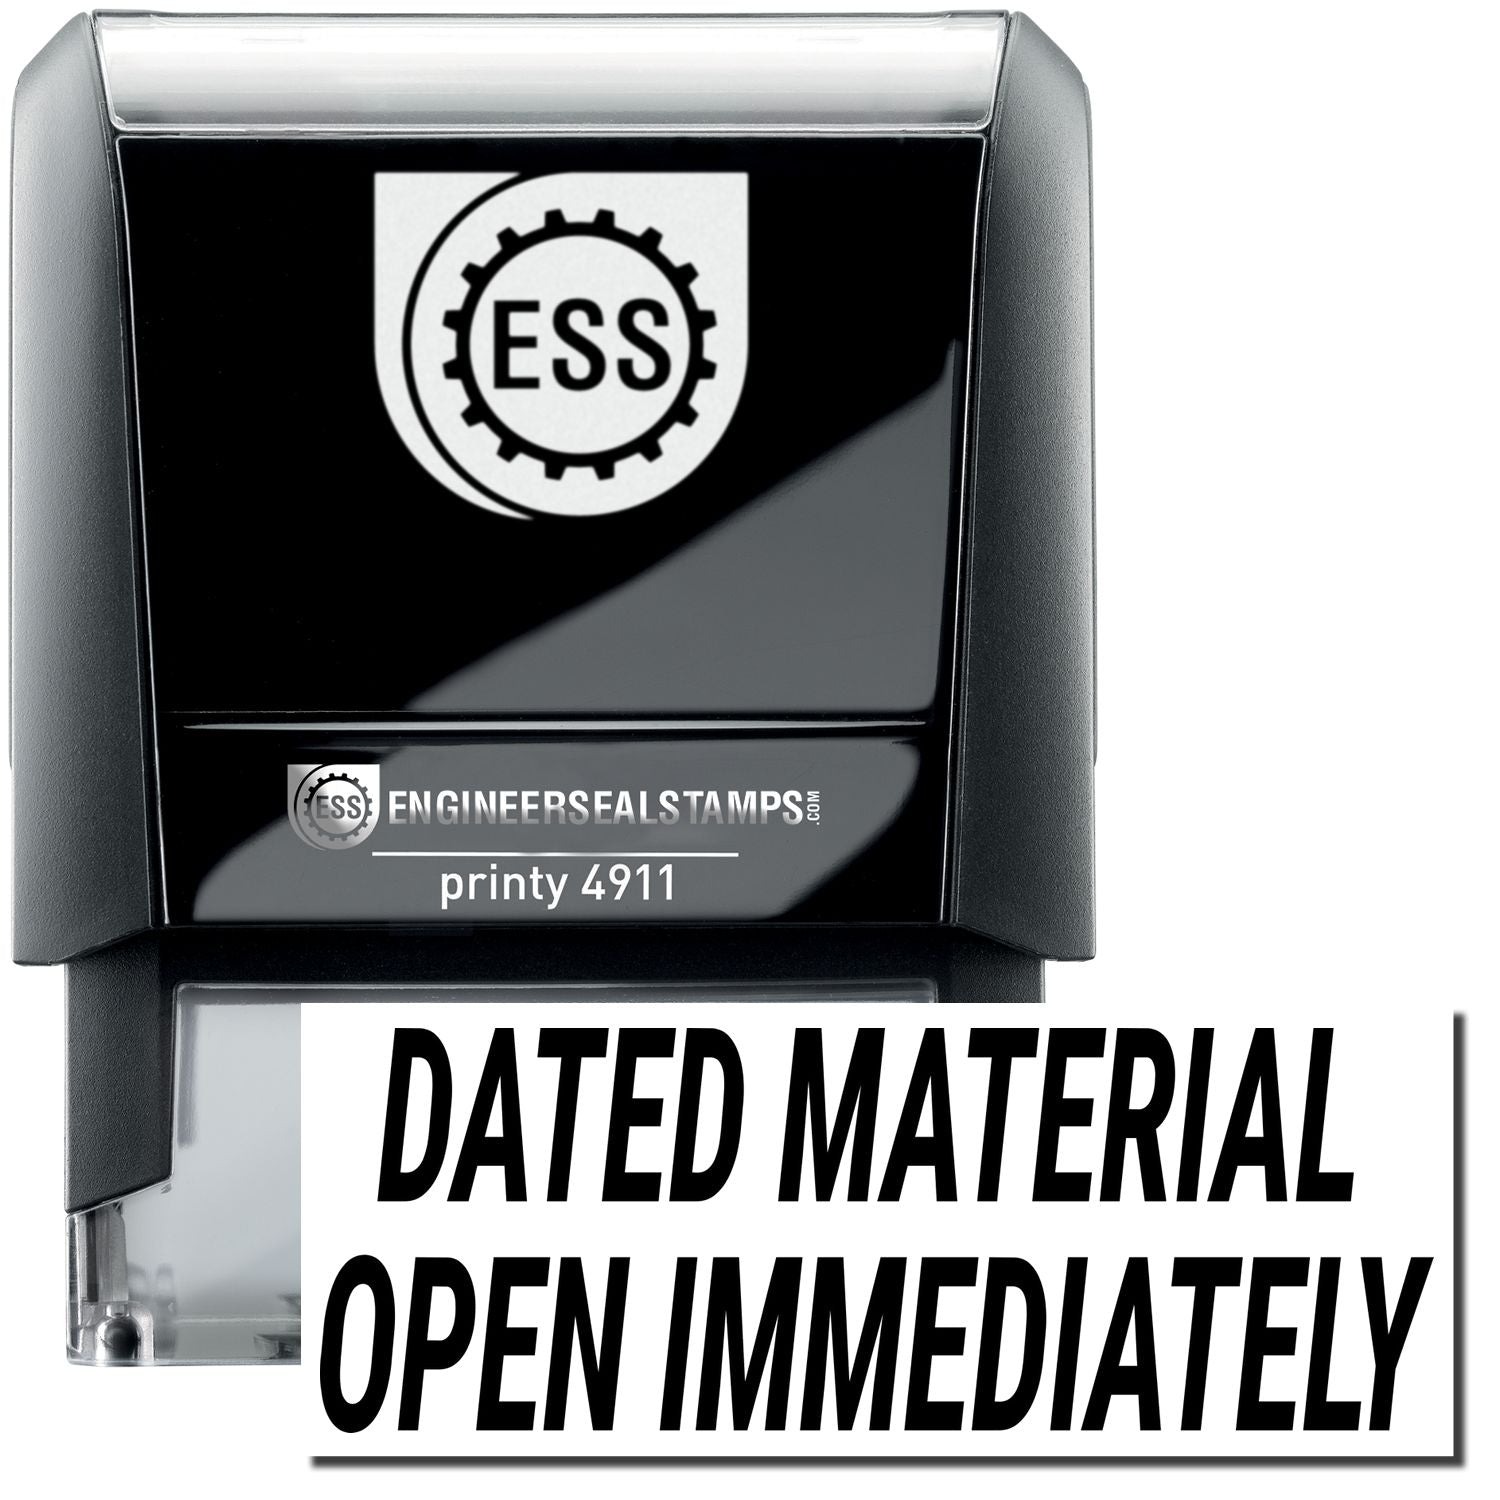 A self-inking stamp with a stamped image showing how the word "DATED MATERIAL OPEN IMMEDIATELY" in bold font is displayed after stamping.